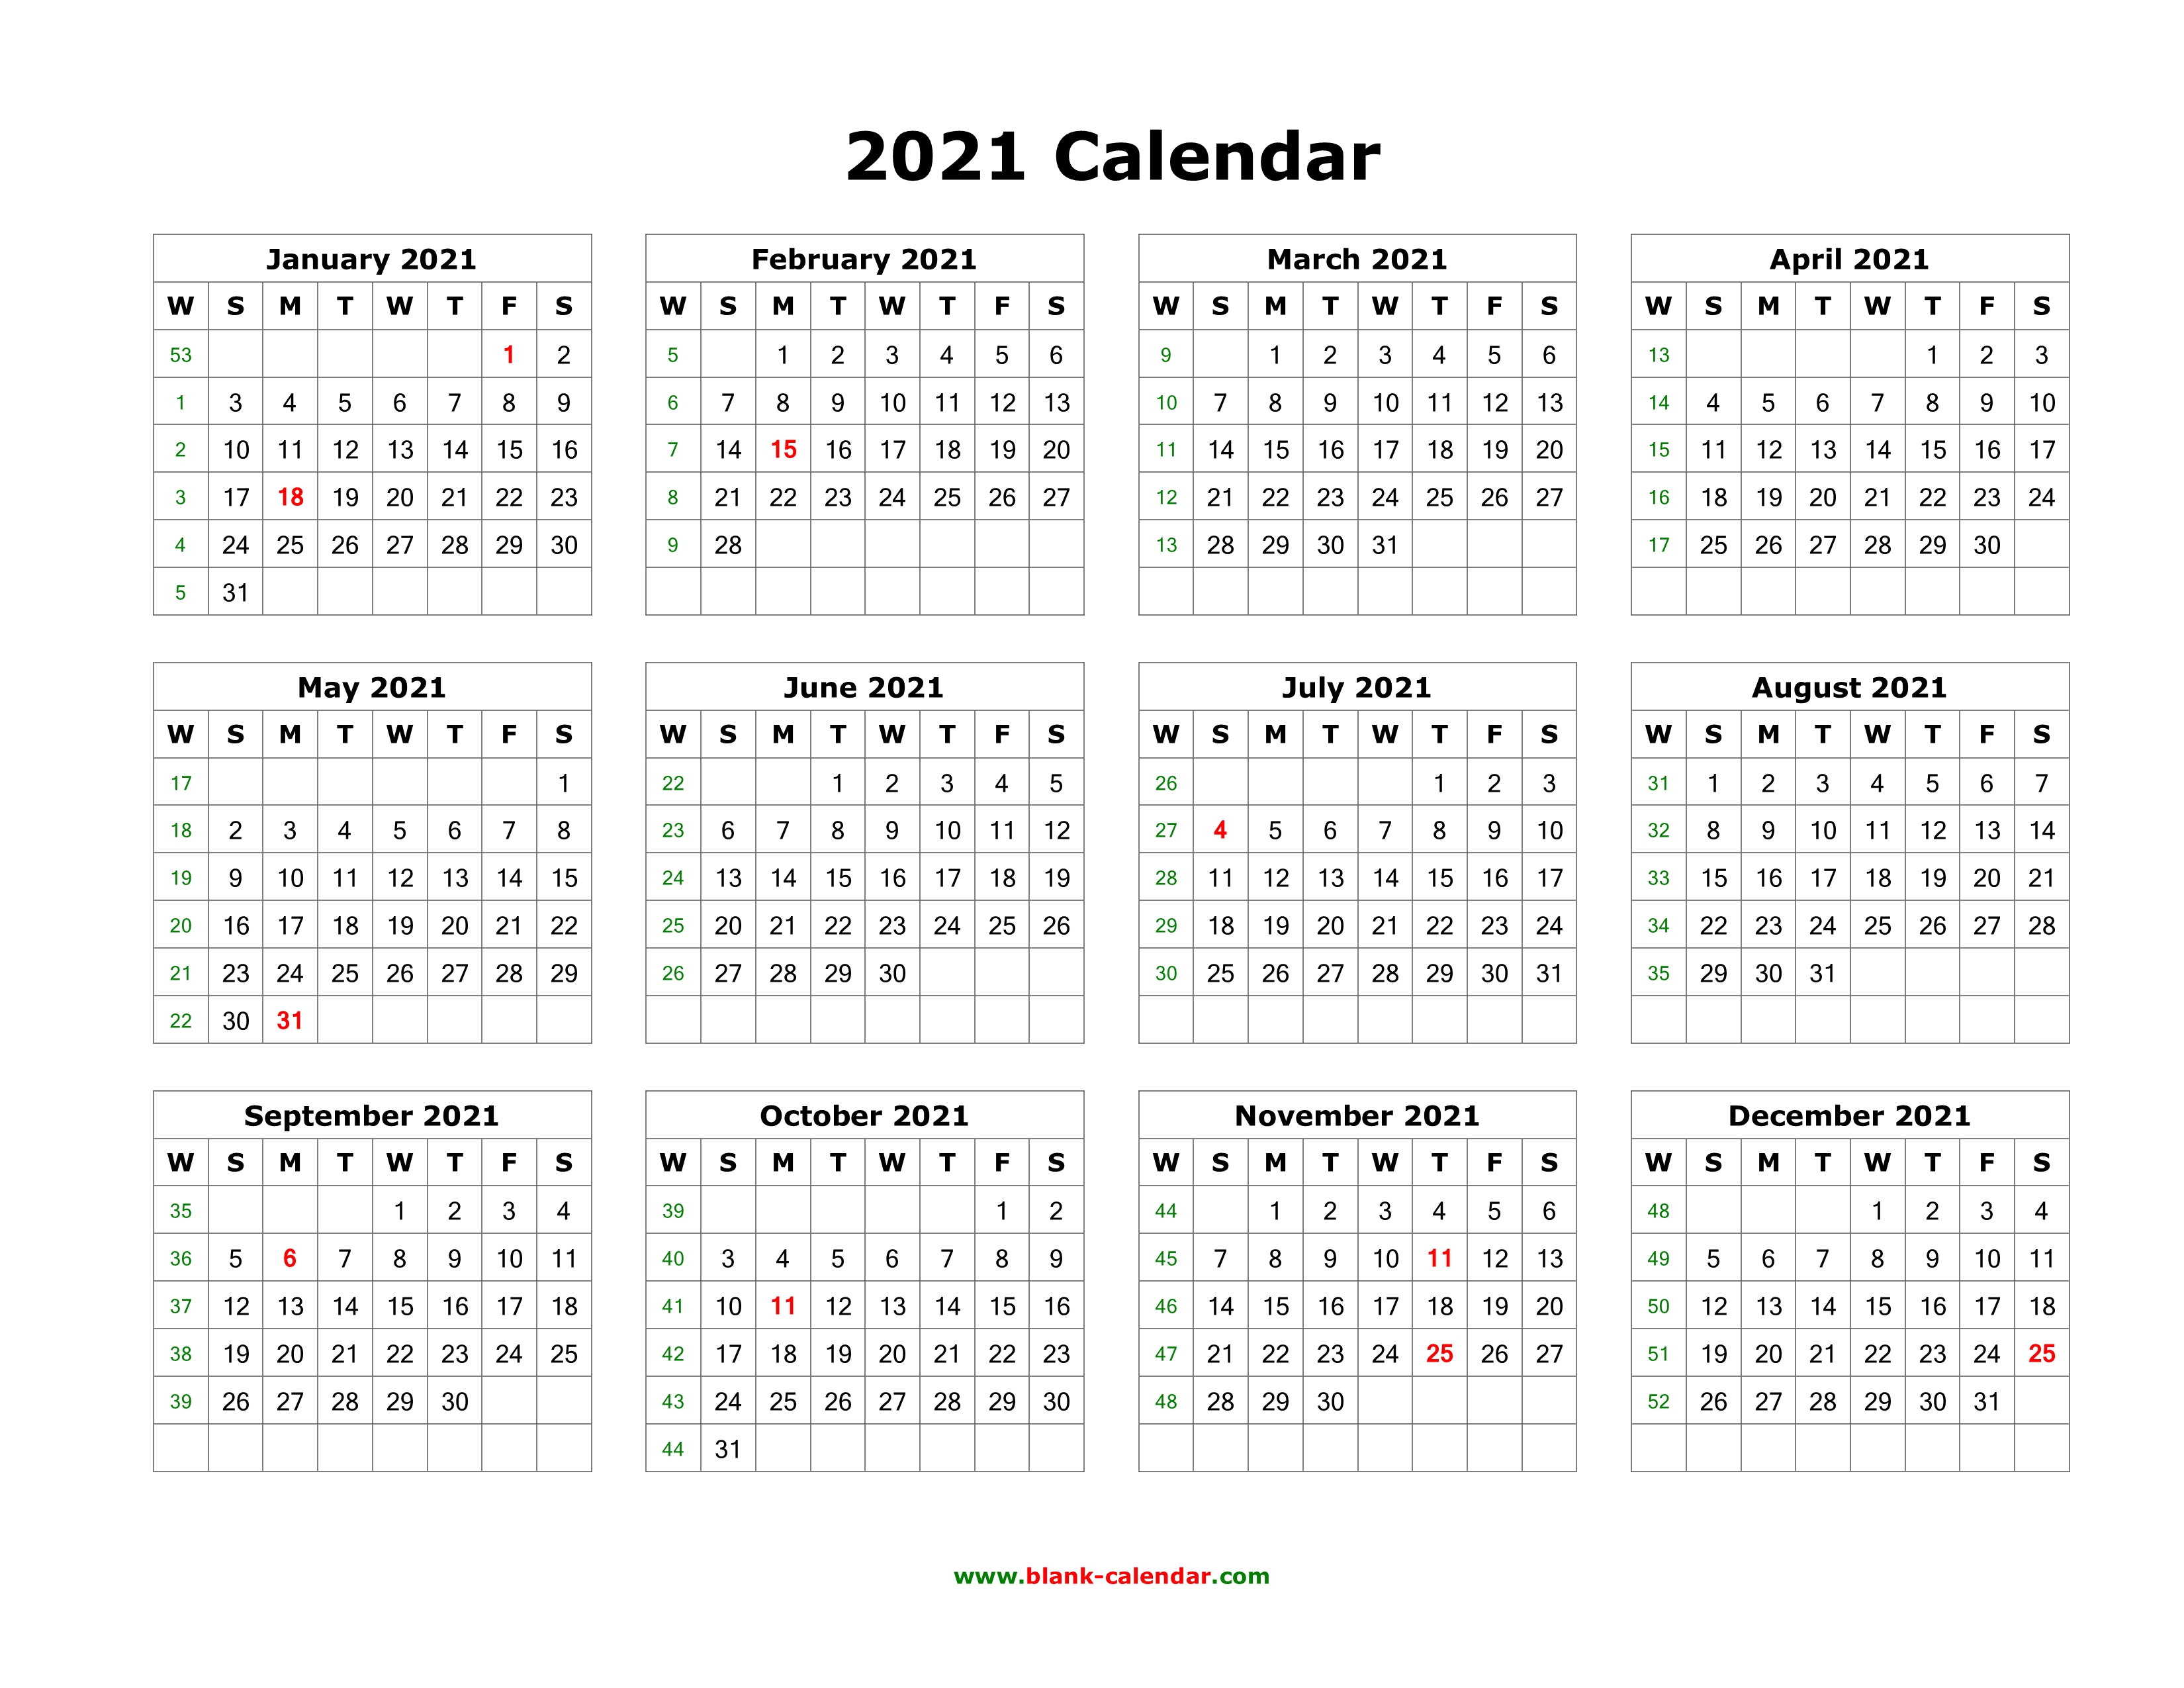 2021 Calendar One Page Download Blank Calendar 2021 (12 months on one page, horizontal)